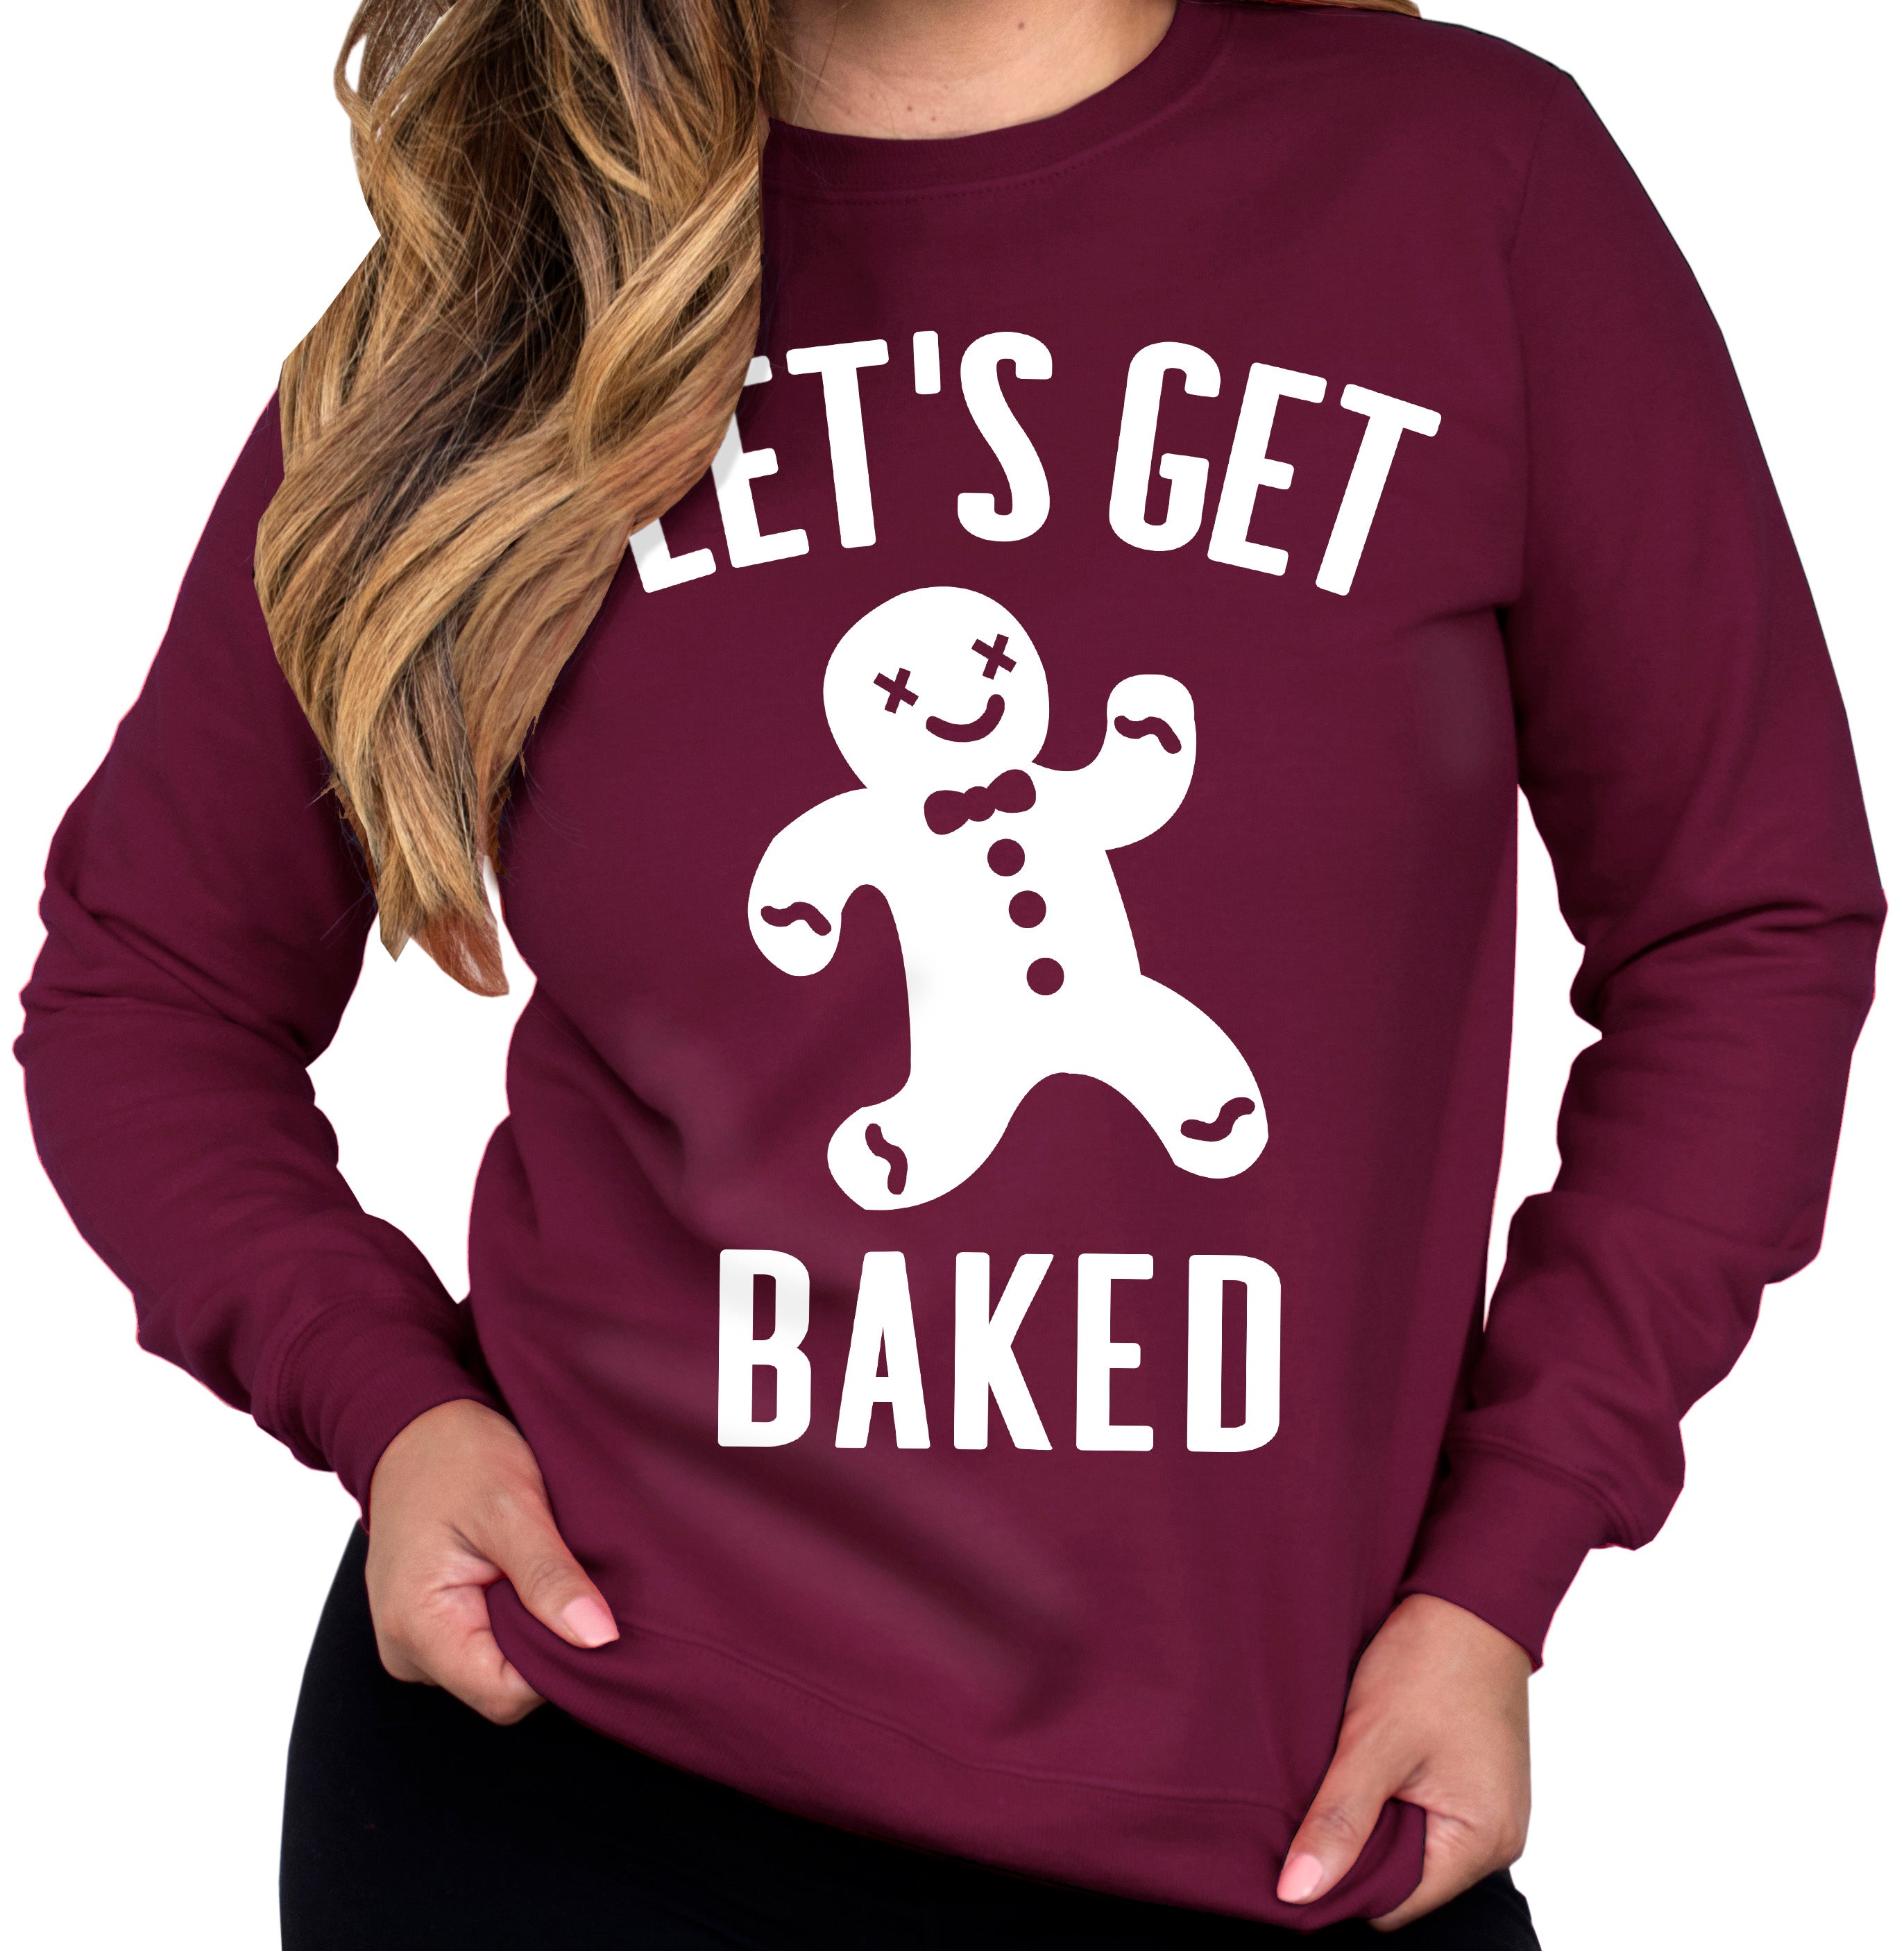 let's get baked ugly christmas sweater